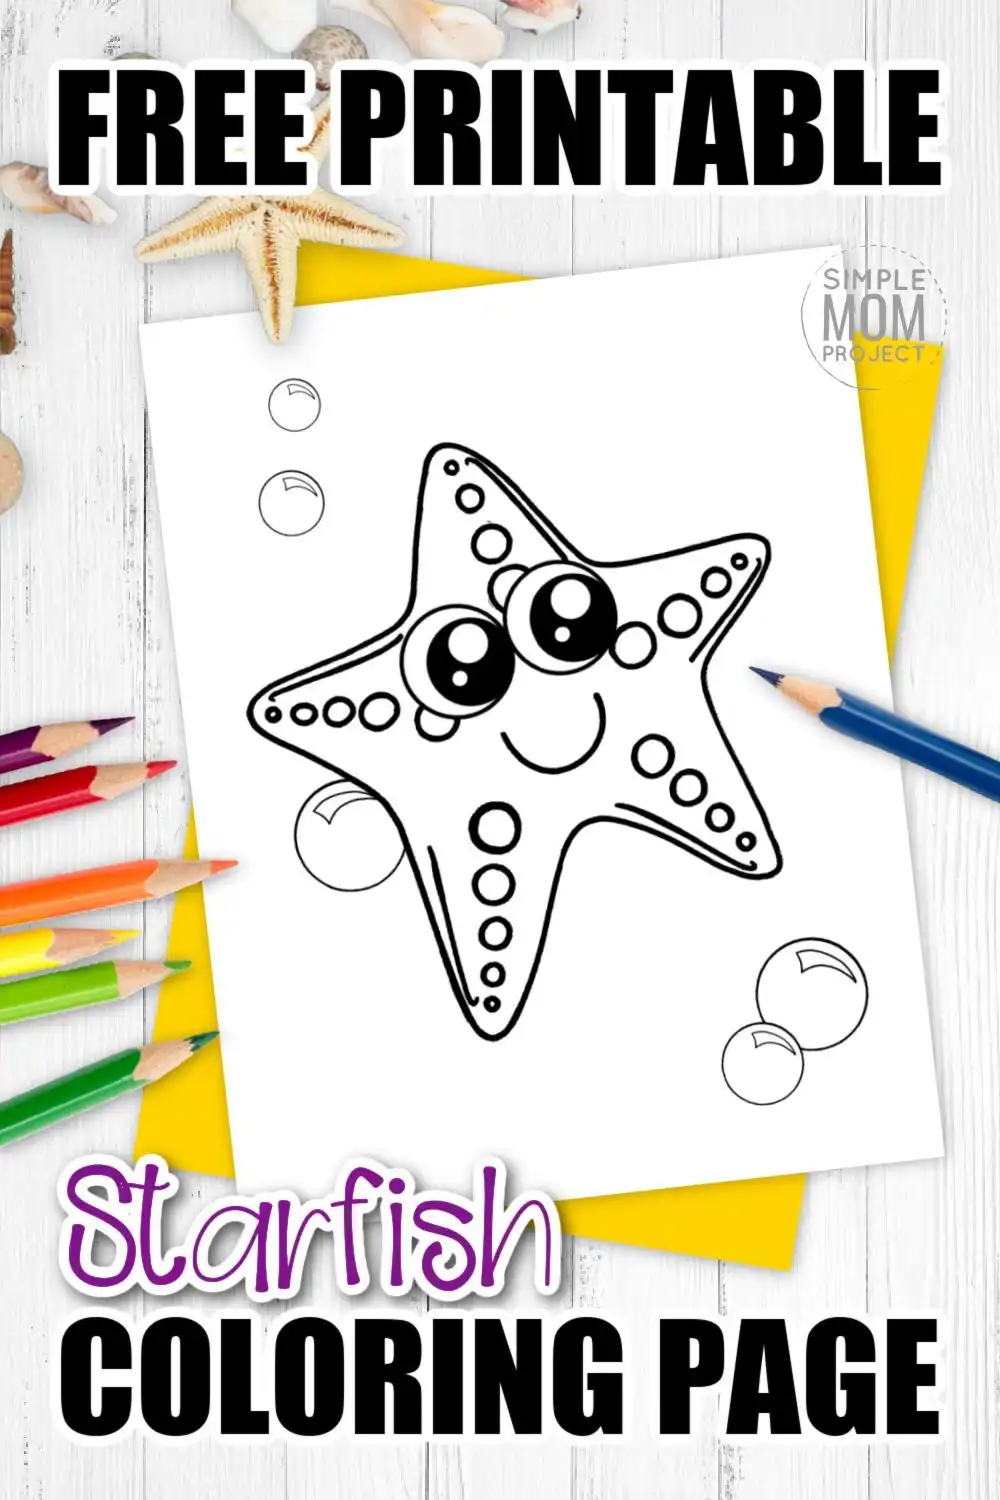 Free printable starfish coloring page â simple mom project